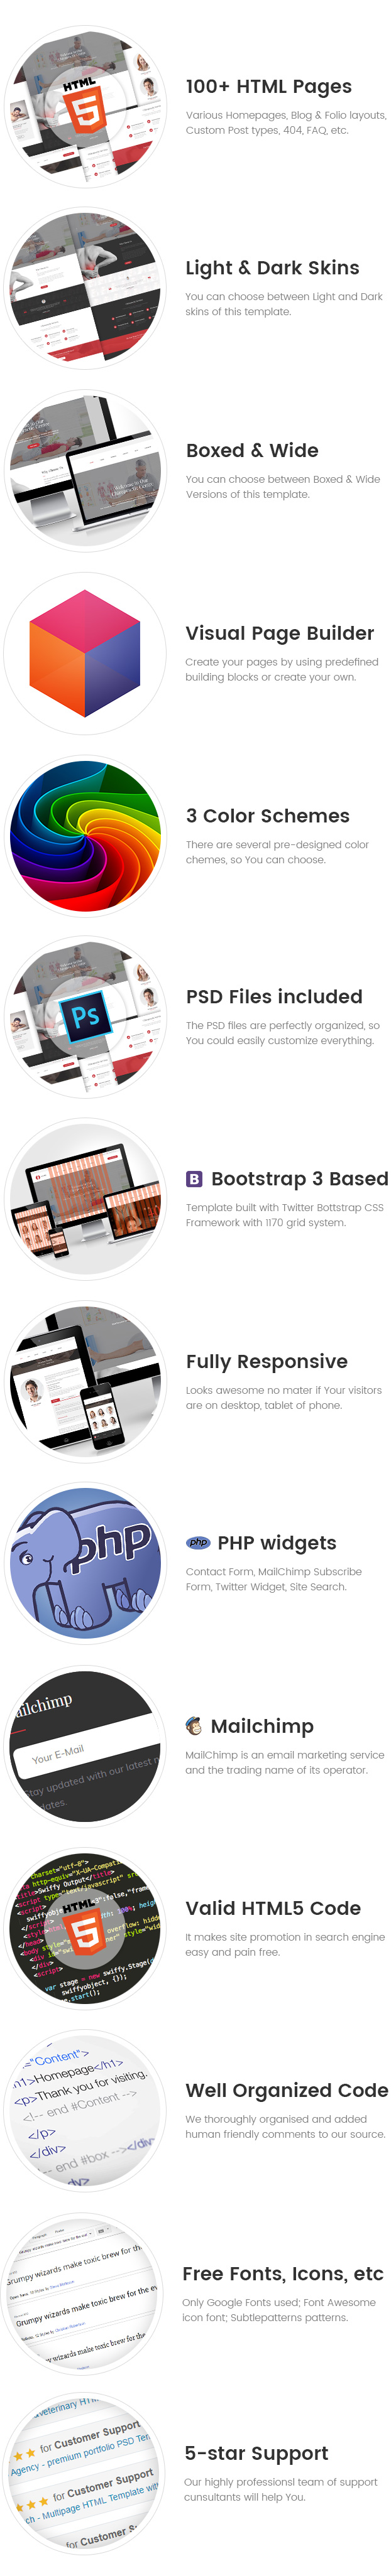 Active Life - Chiropractic Center HTML Template with Visual Page Builder